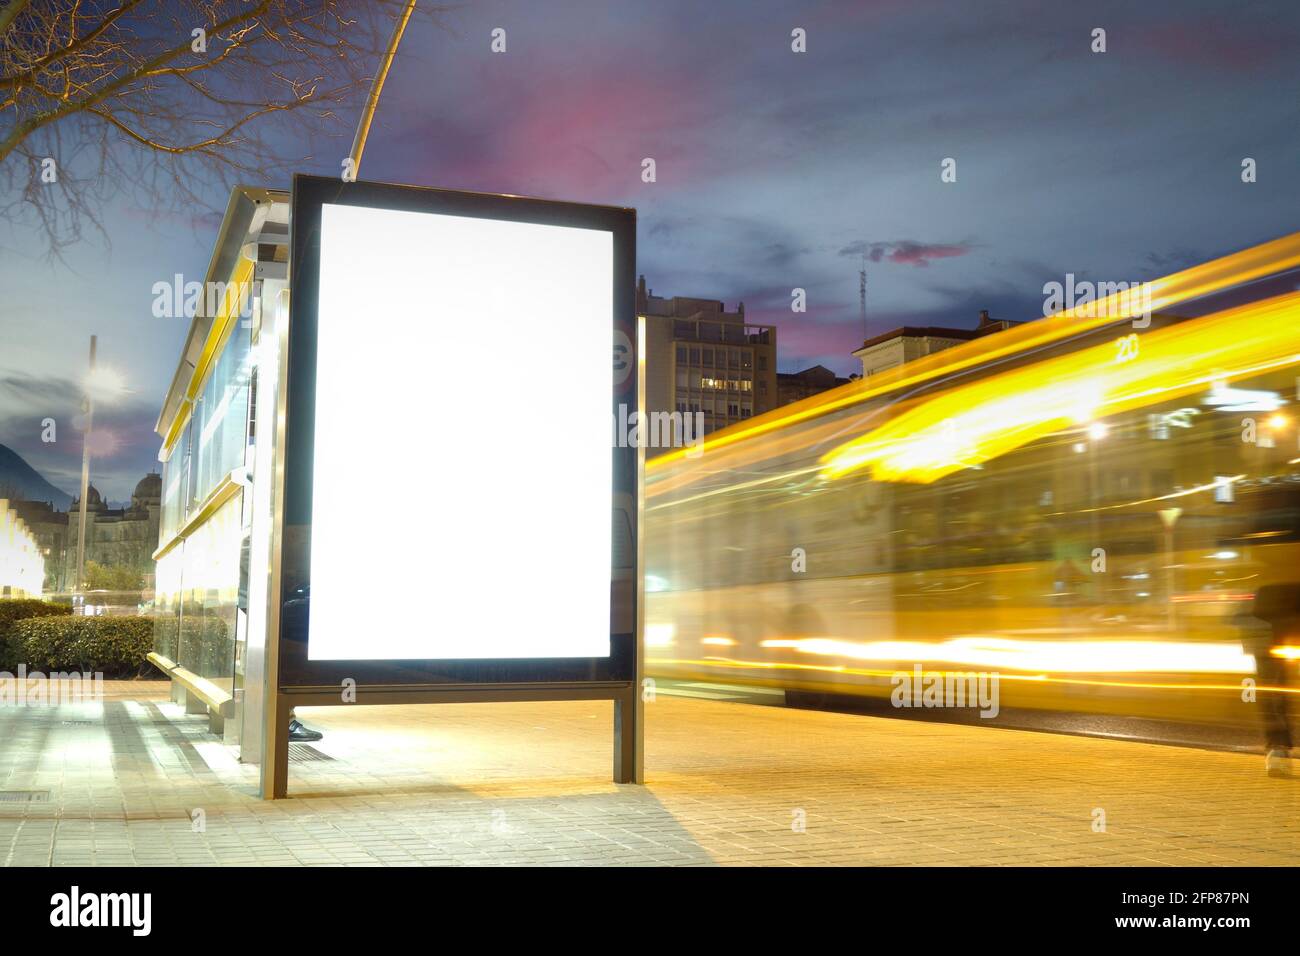 Blank advertisement mock up in a bus stop, with blurred traffic lights at night Stock Photo